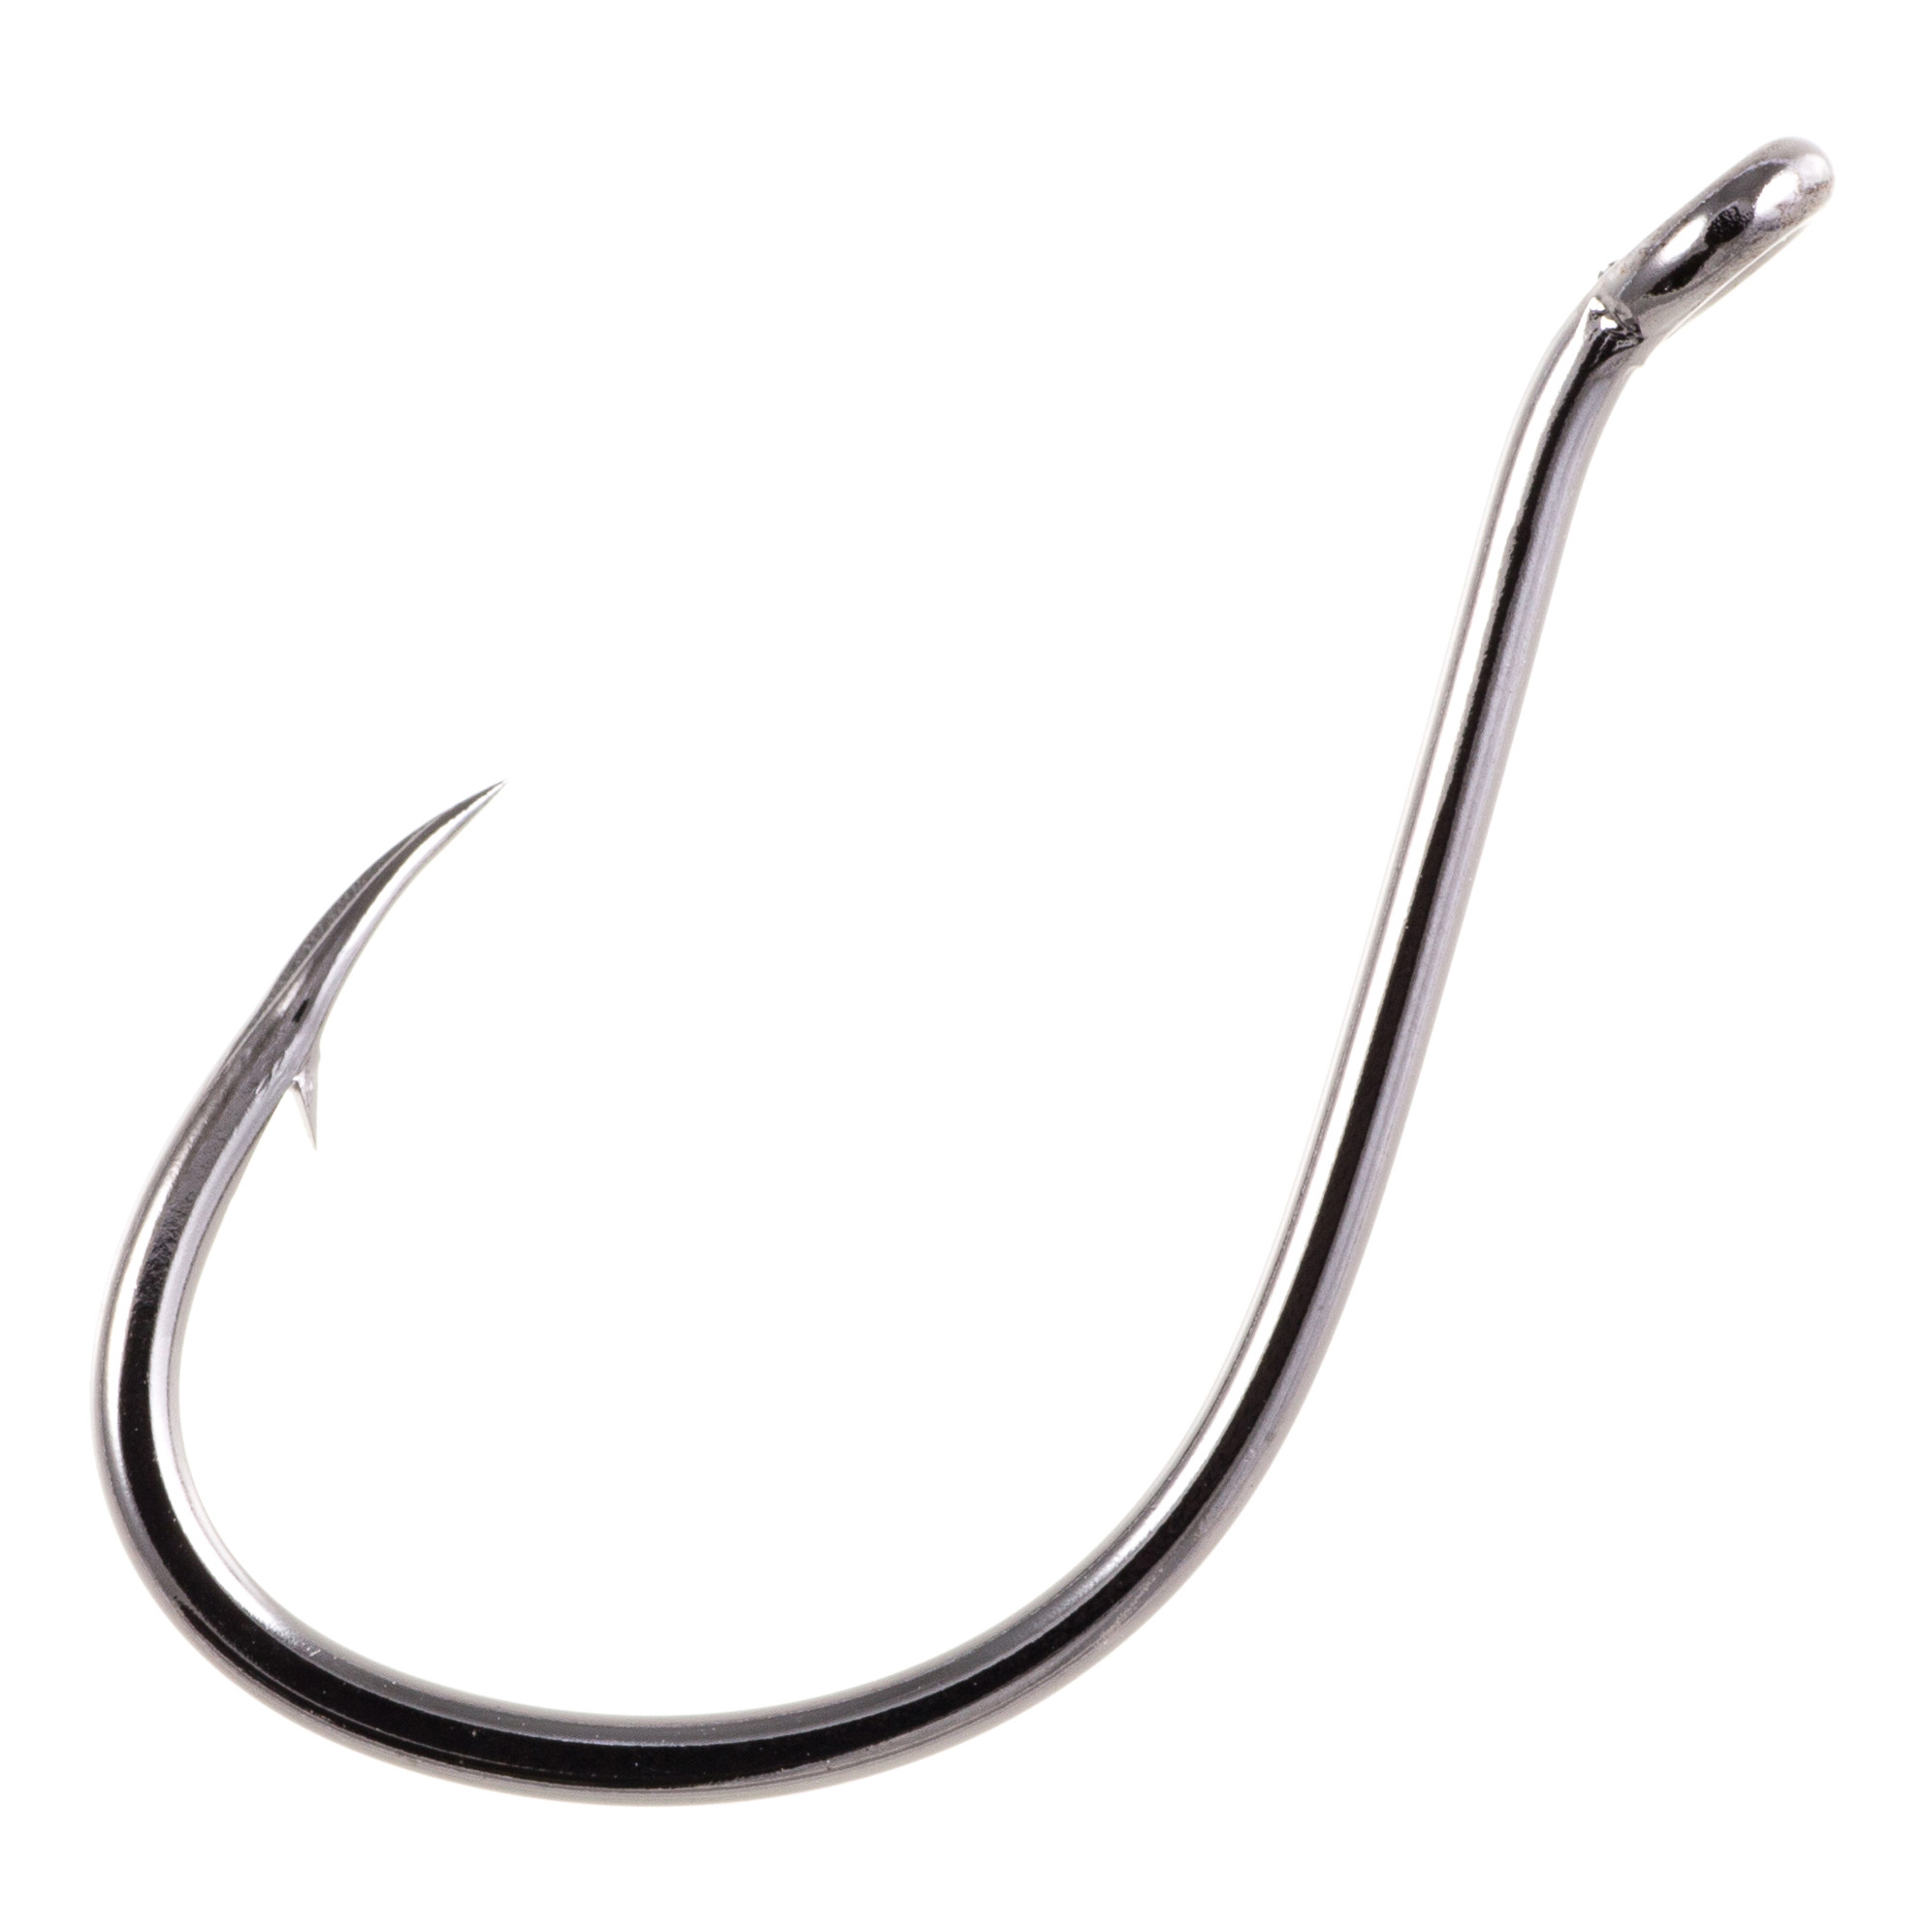 Fish hooks at Sea Owner 5180 SSW Cutting Point Eyelet from Trolling driffting 